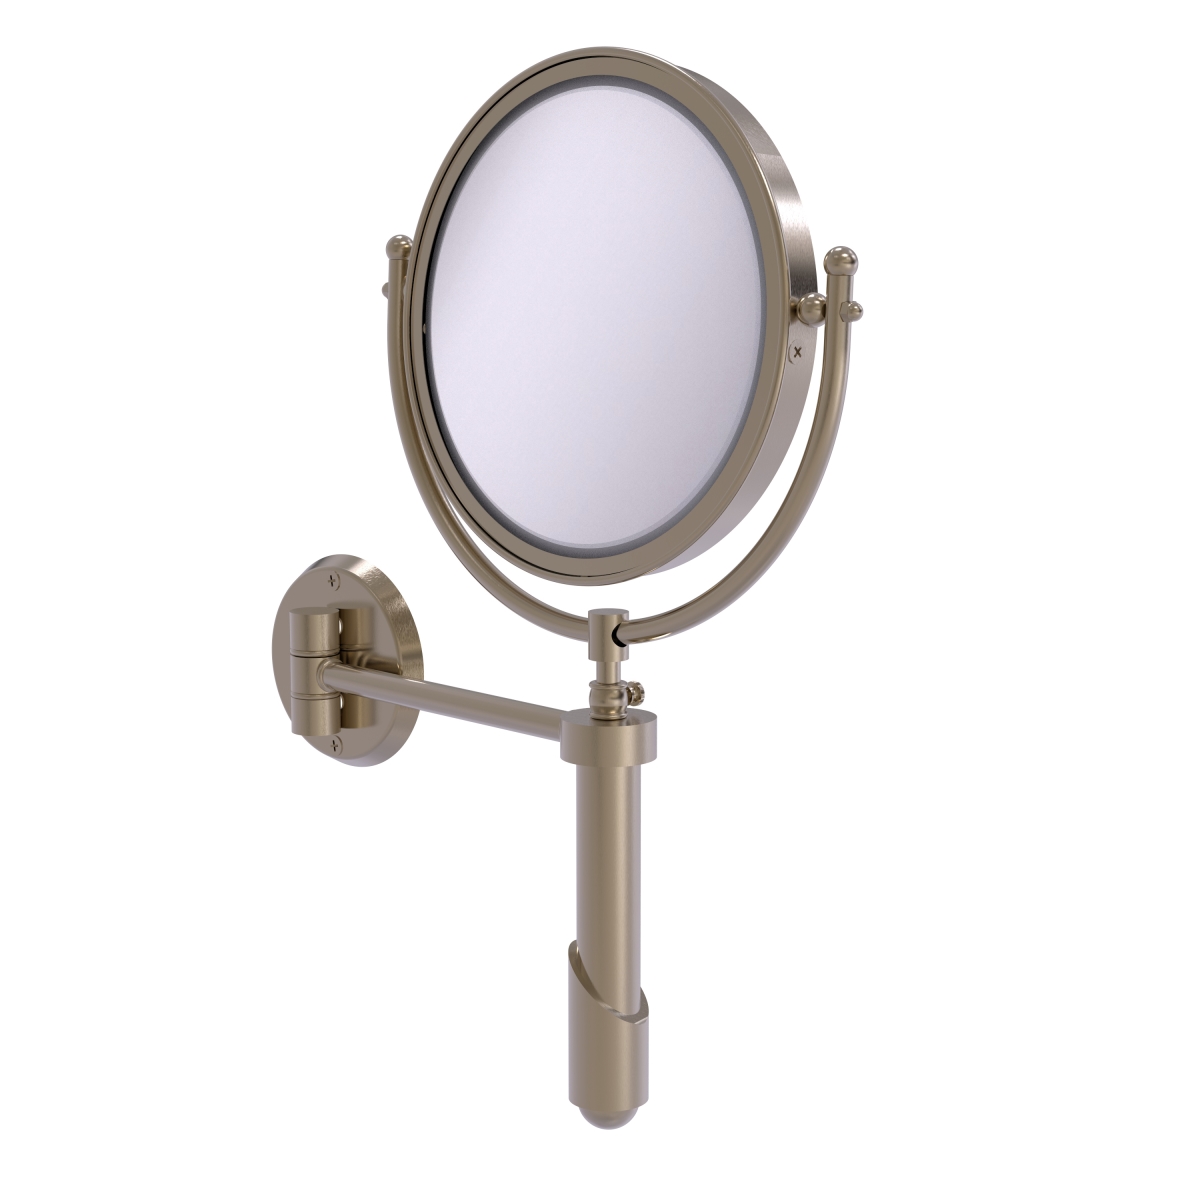 SHM-8-5X-PEW 8 in. dia. Soho Collection Wall Mounted Make-Up Mirror with 5X Magnification, Antique Pewter -  Allied Brass, SHM-8/5X-PEW